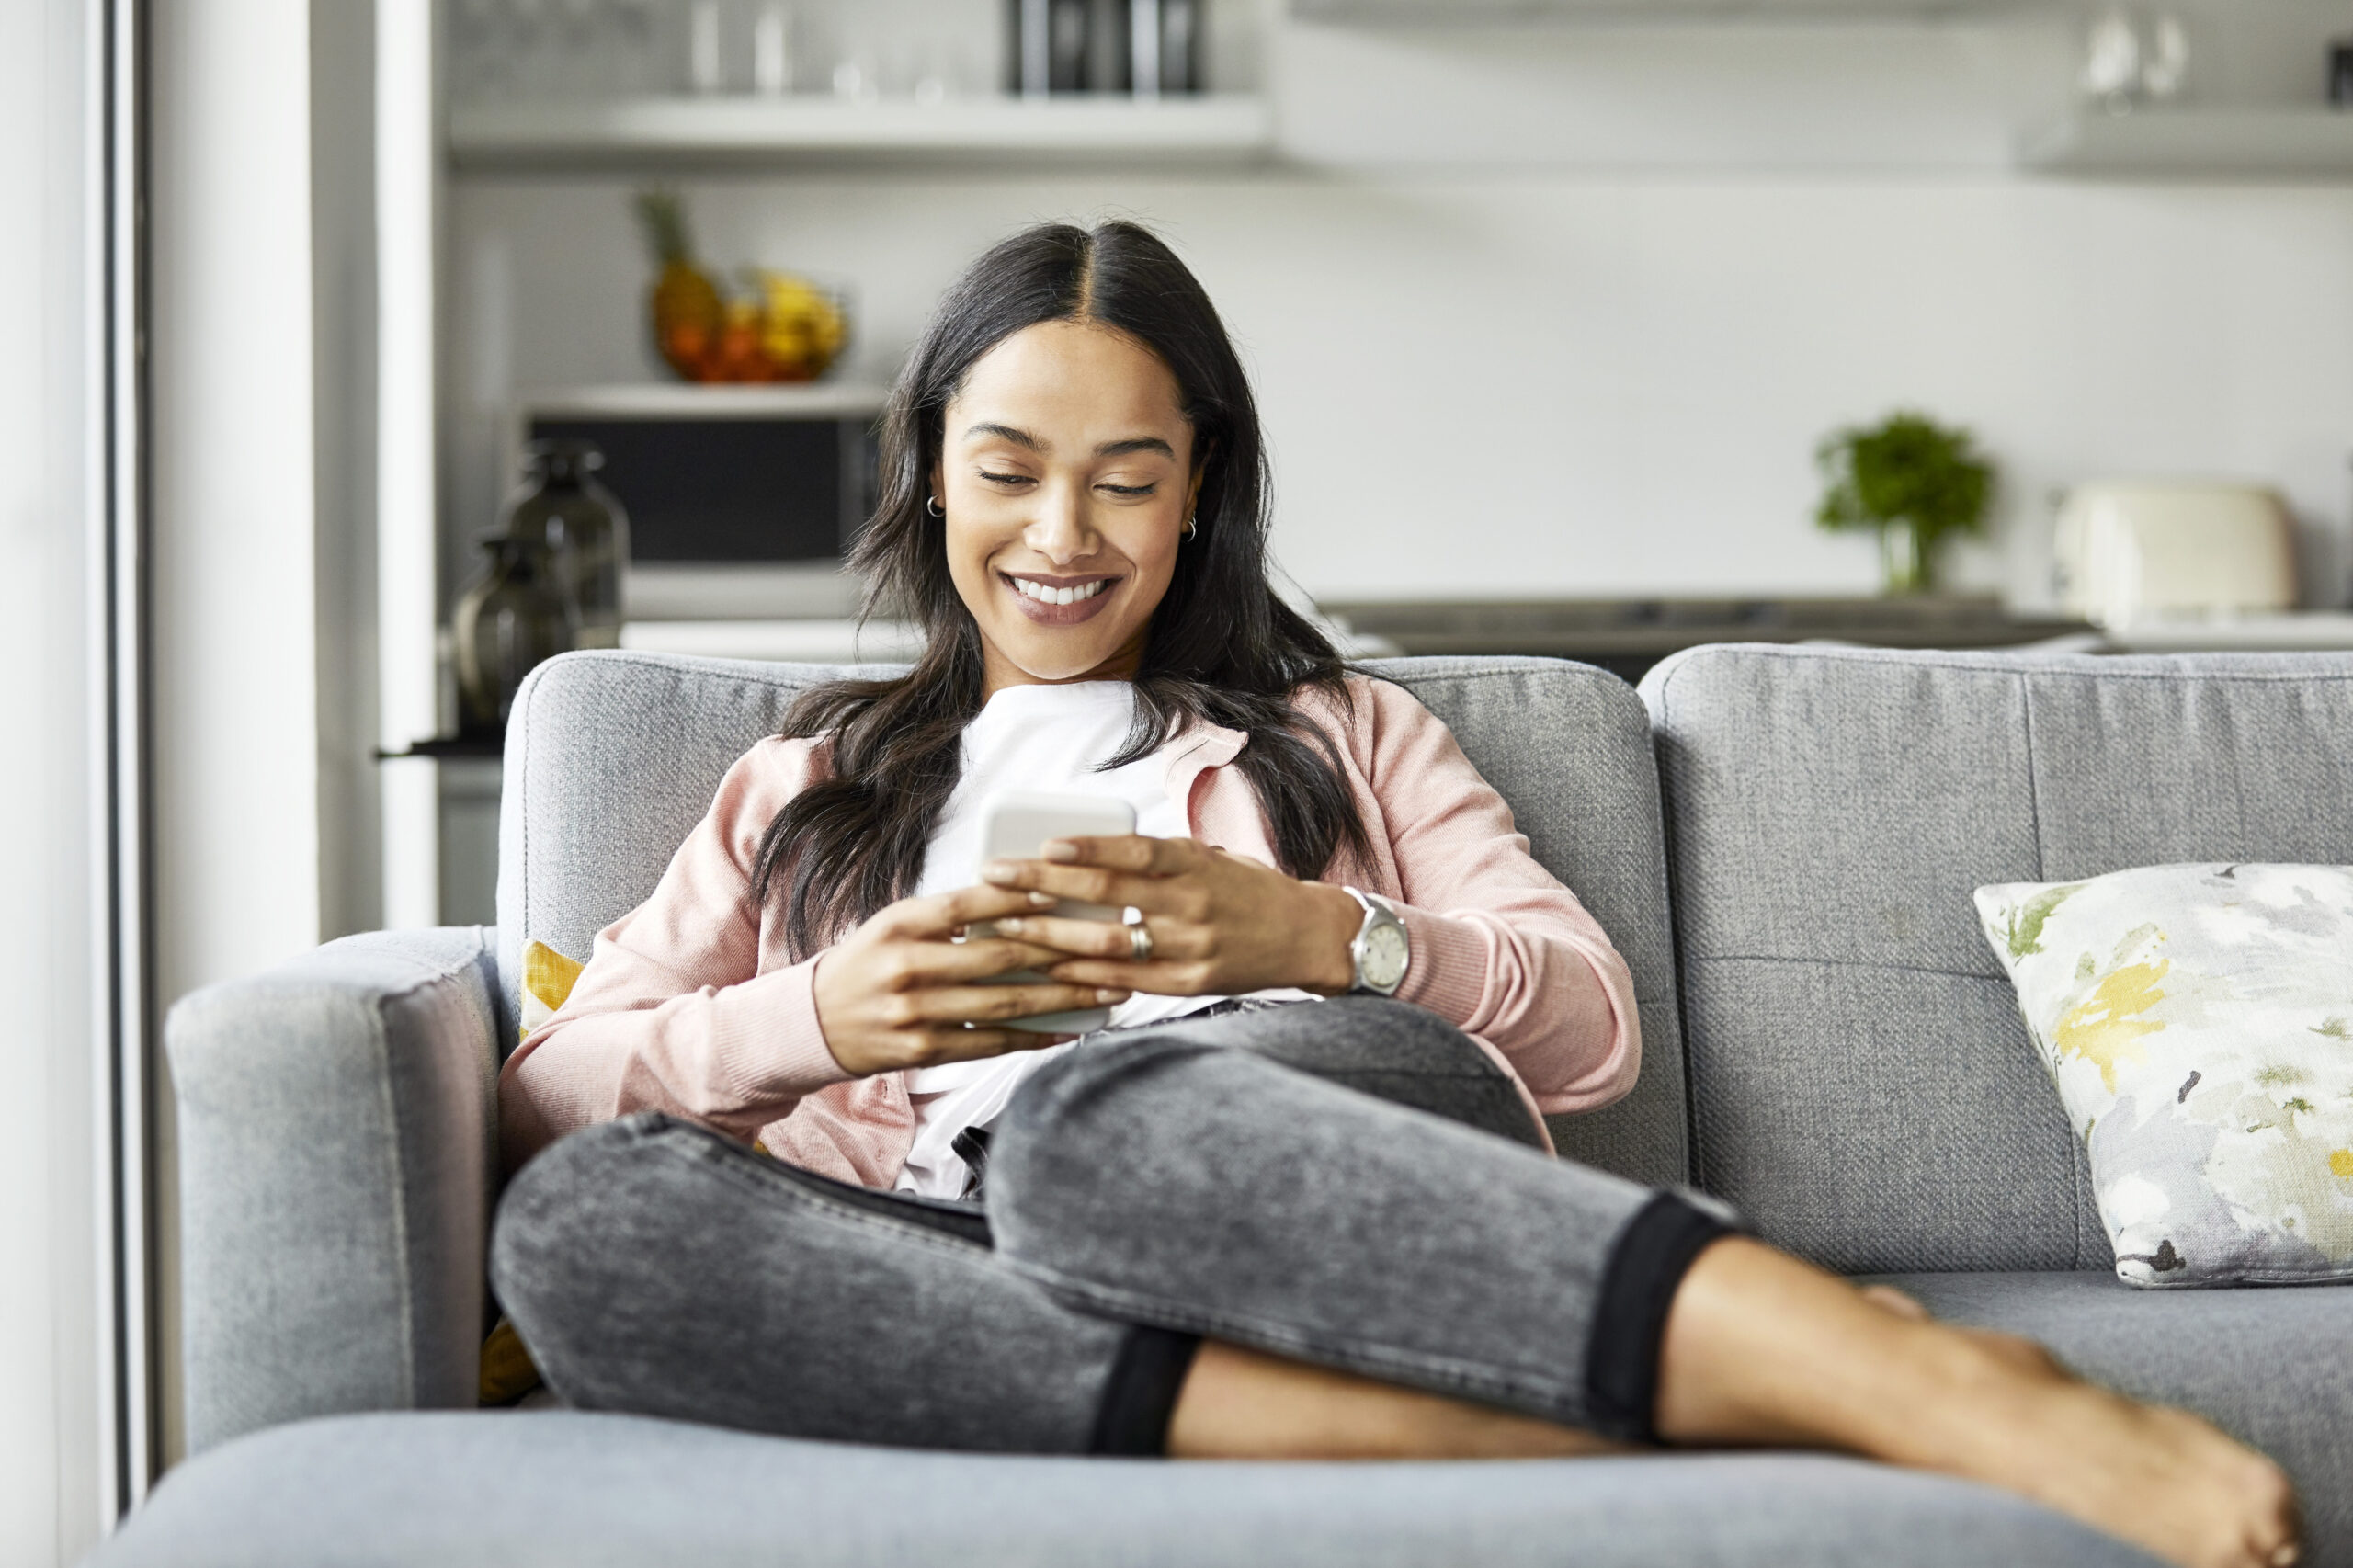 Happy woman text messaging on smart phone at home